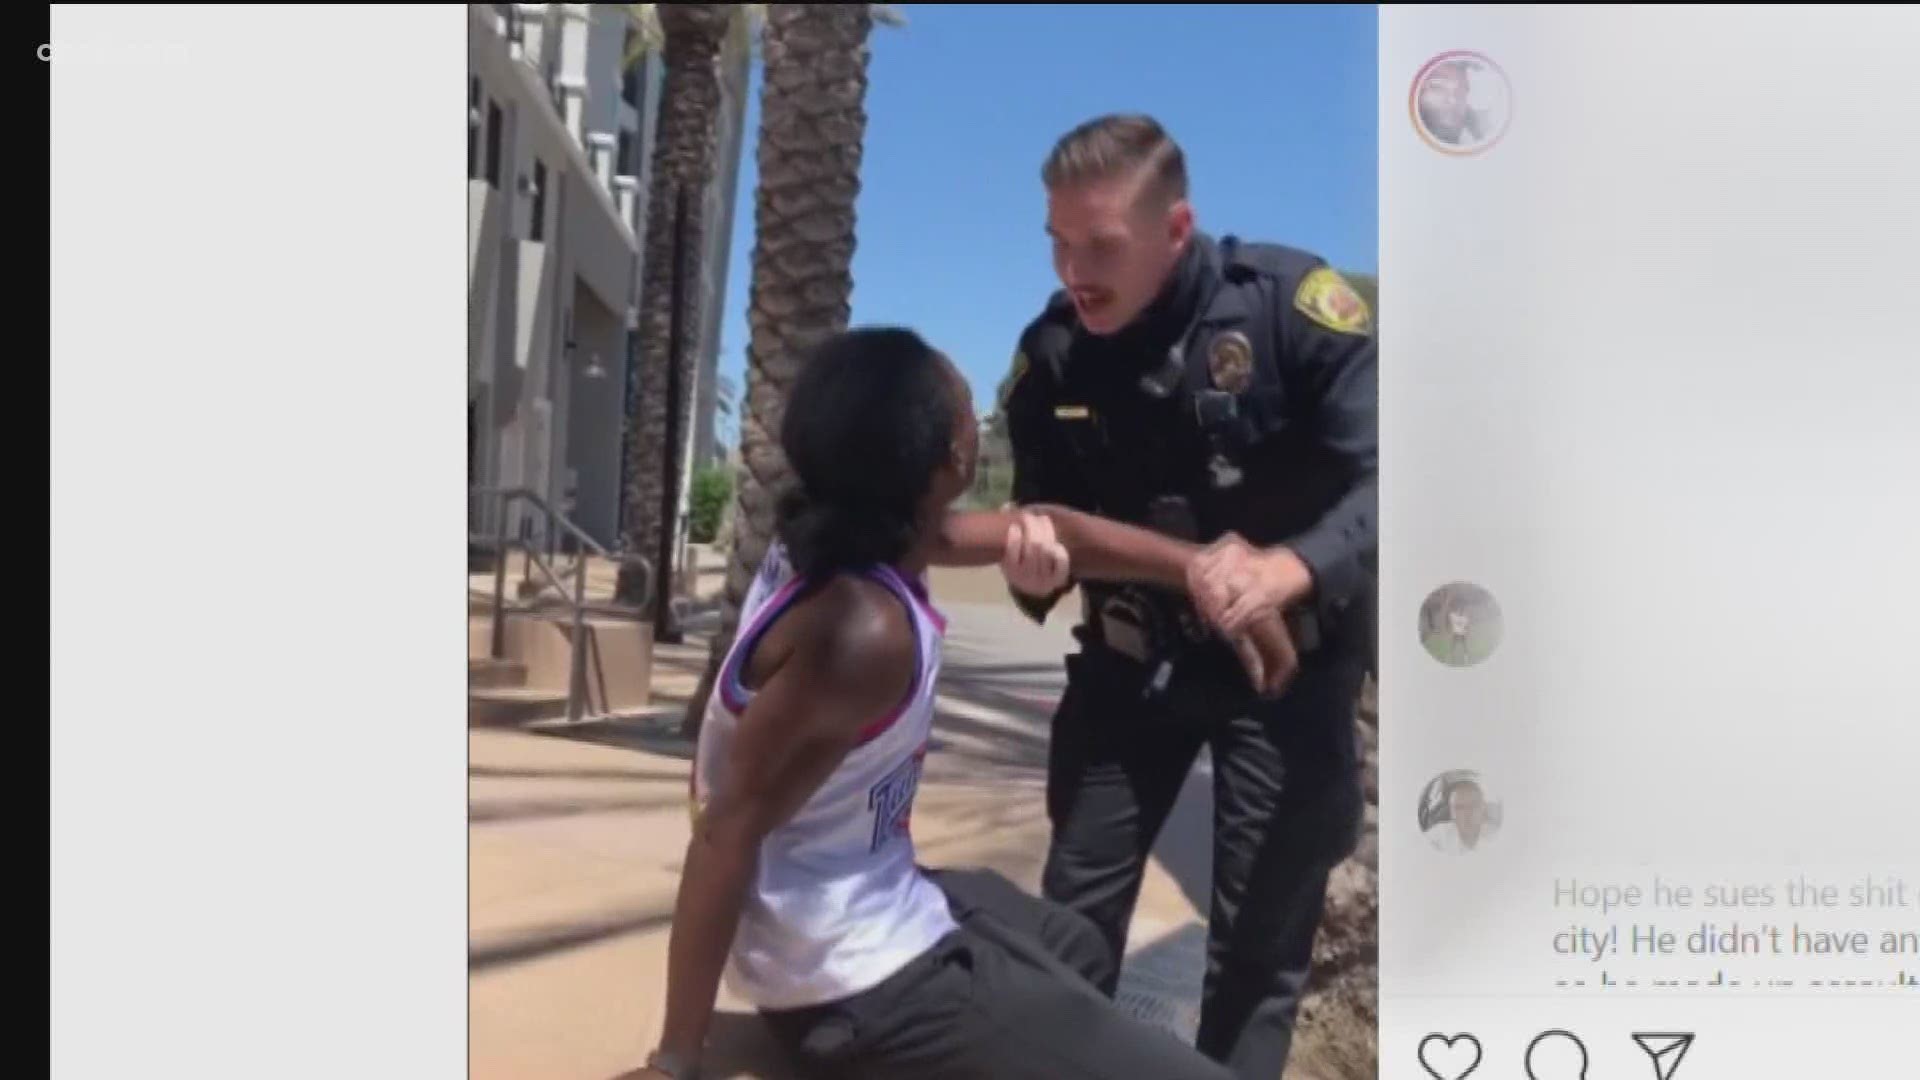 In a video of the heated exchange a white male police officer is seen pushing a black male repeatedly into a seated position before handcuffing, then arresting him.